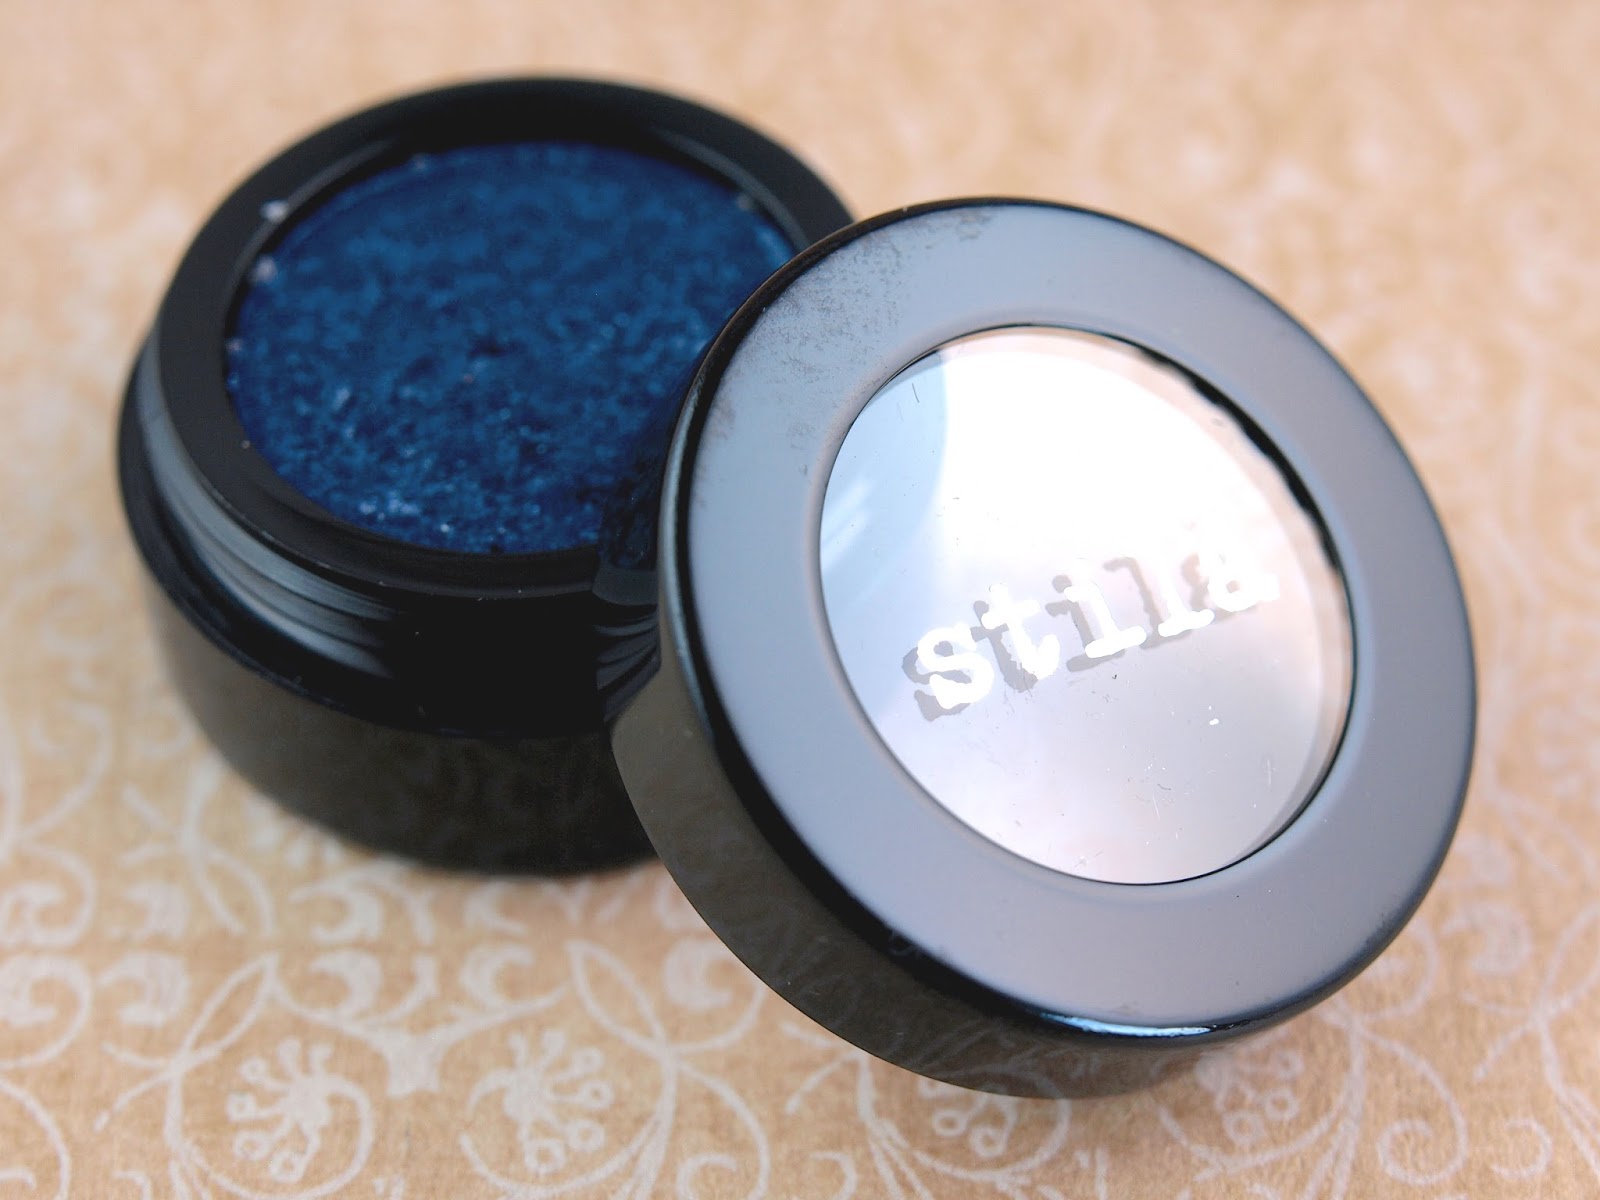 Stila Magnificent Metals Eye Liner in "Metallic Navy": Review and Swatches